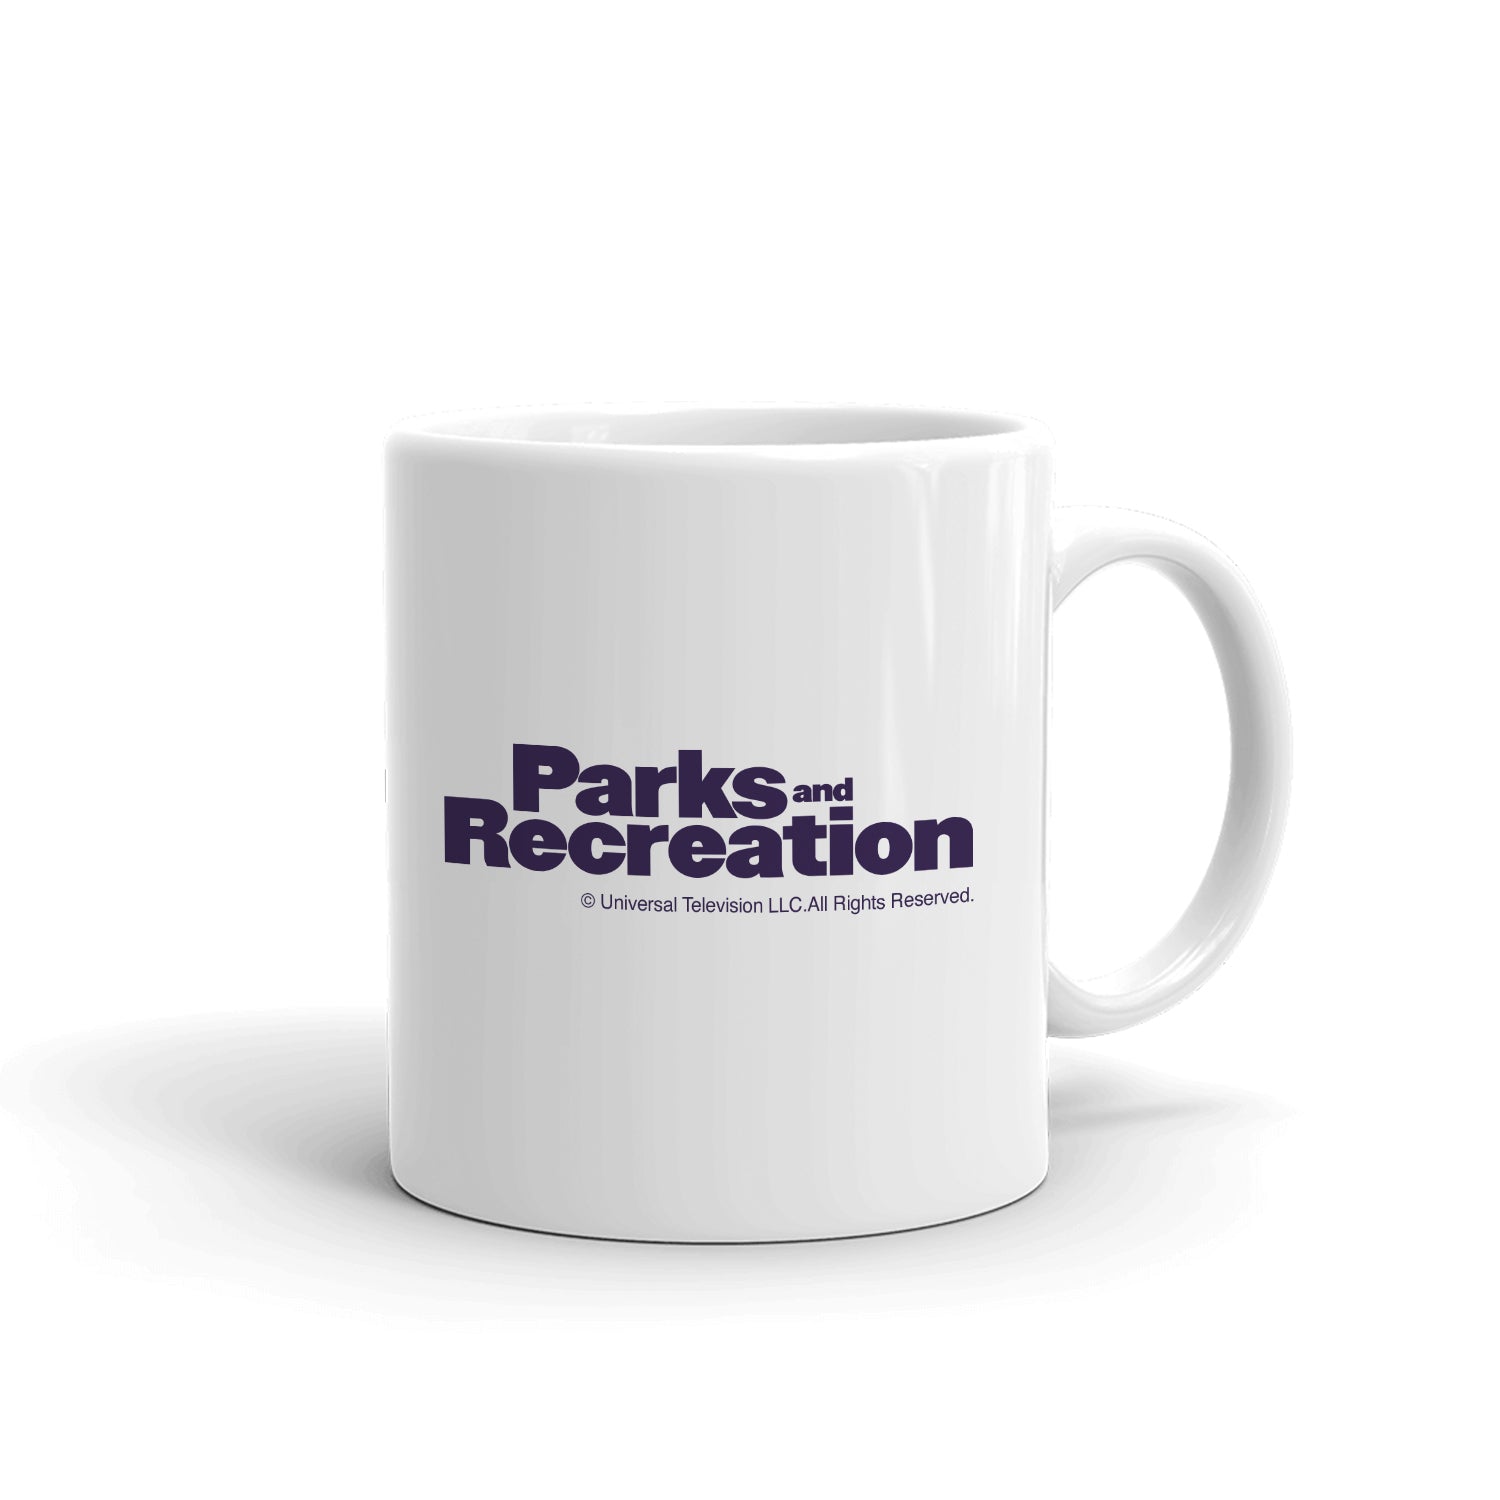 Parks and Recreation Friends, Waffles, and Work Mug